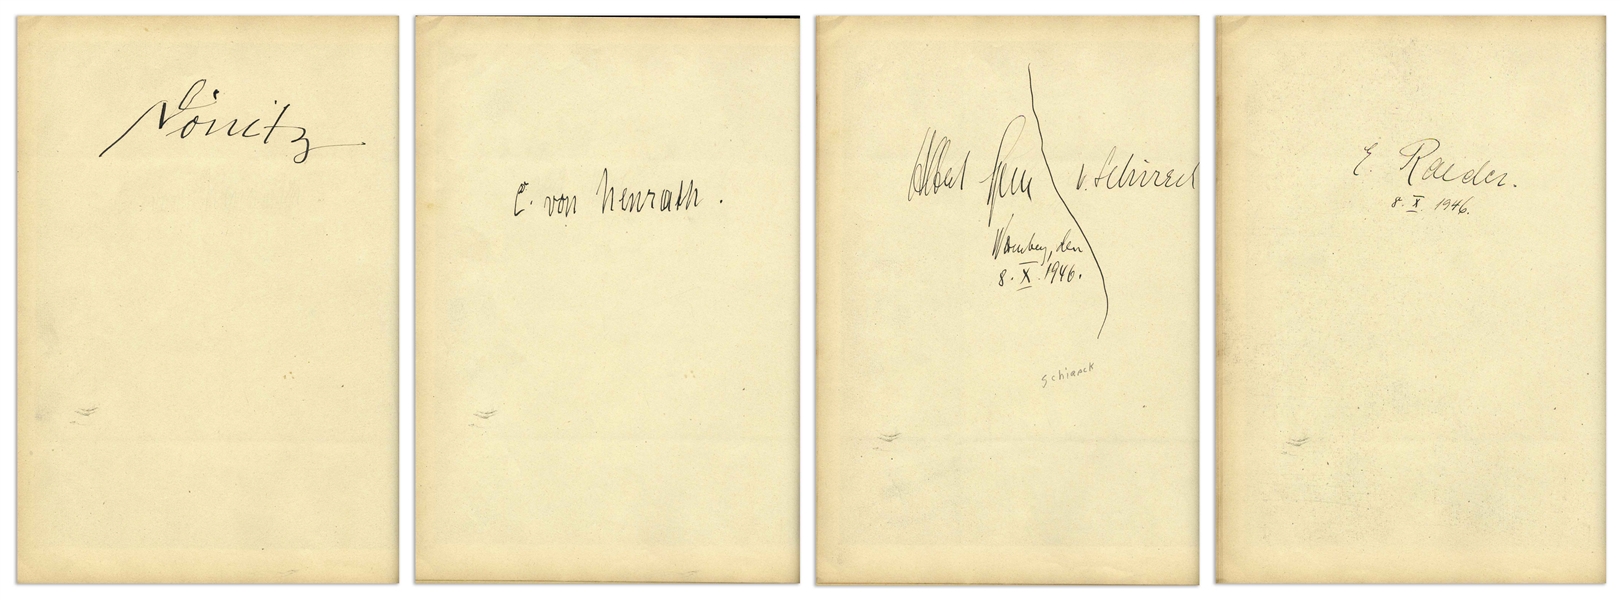 Nuremberg Book Signed by 18 Nazi War Criminals During the WWII Nuremberg Trials -- Includes Signatures by Goring, Donitz, Streicher & Speer, and Also Two ID Cards by U.S. Guard Who Acquired Signatures